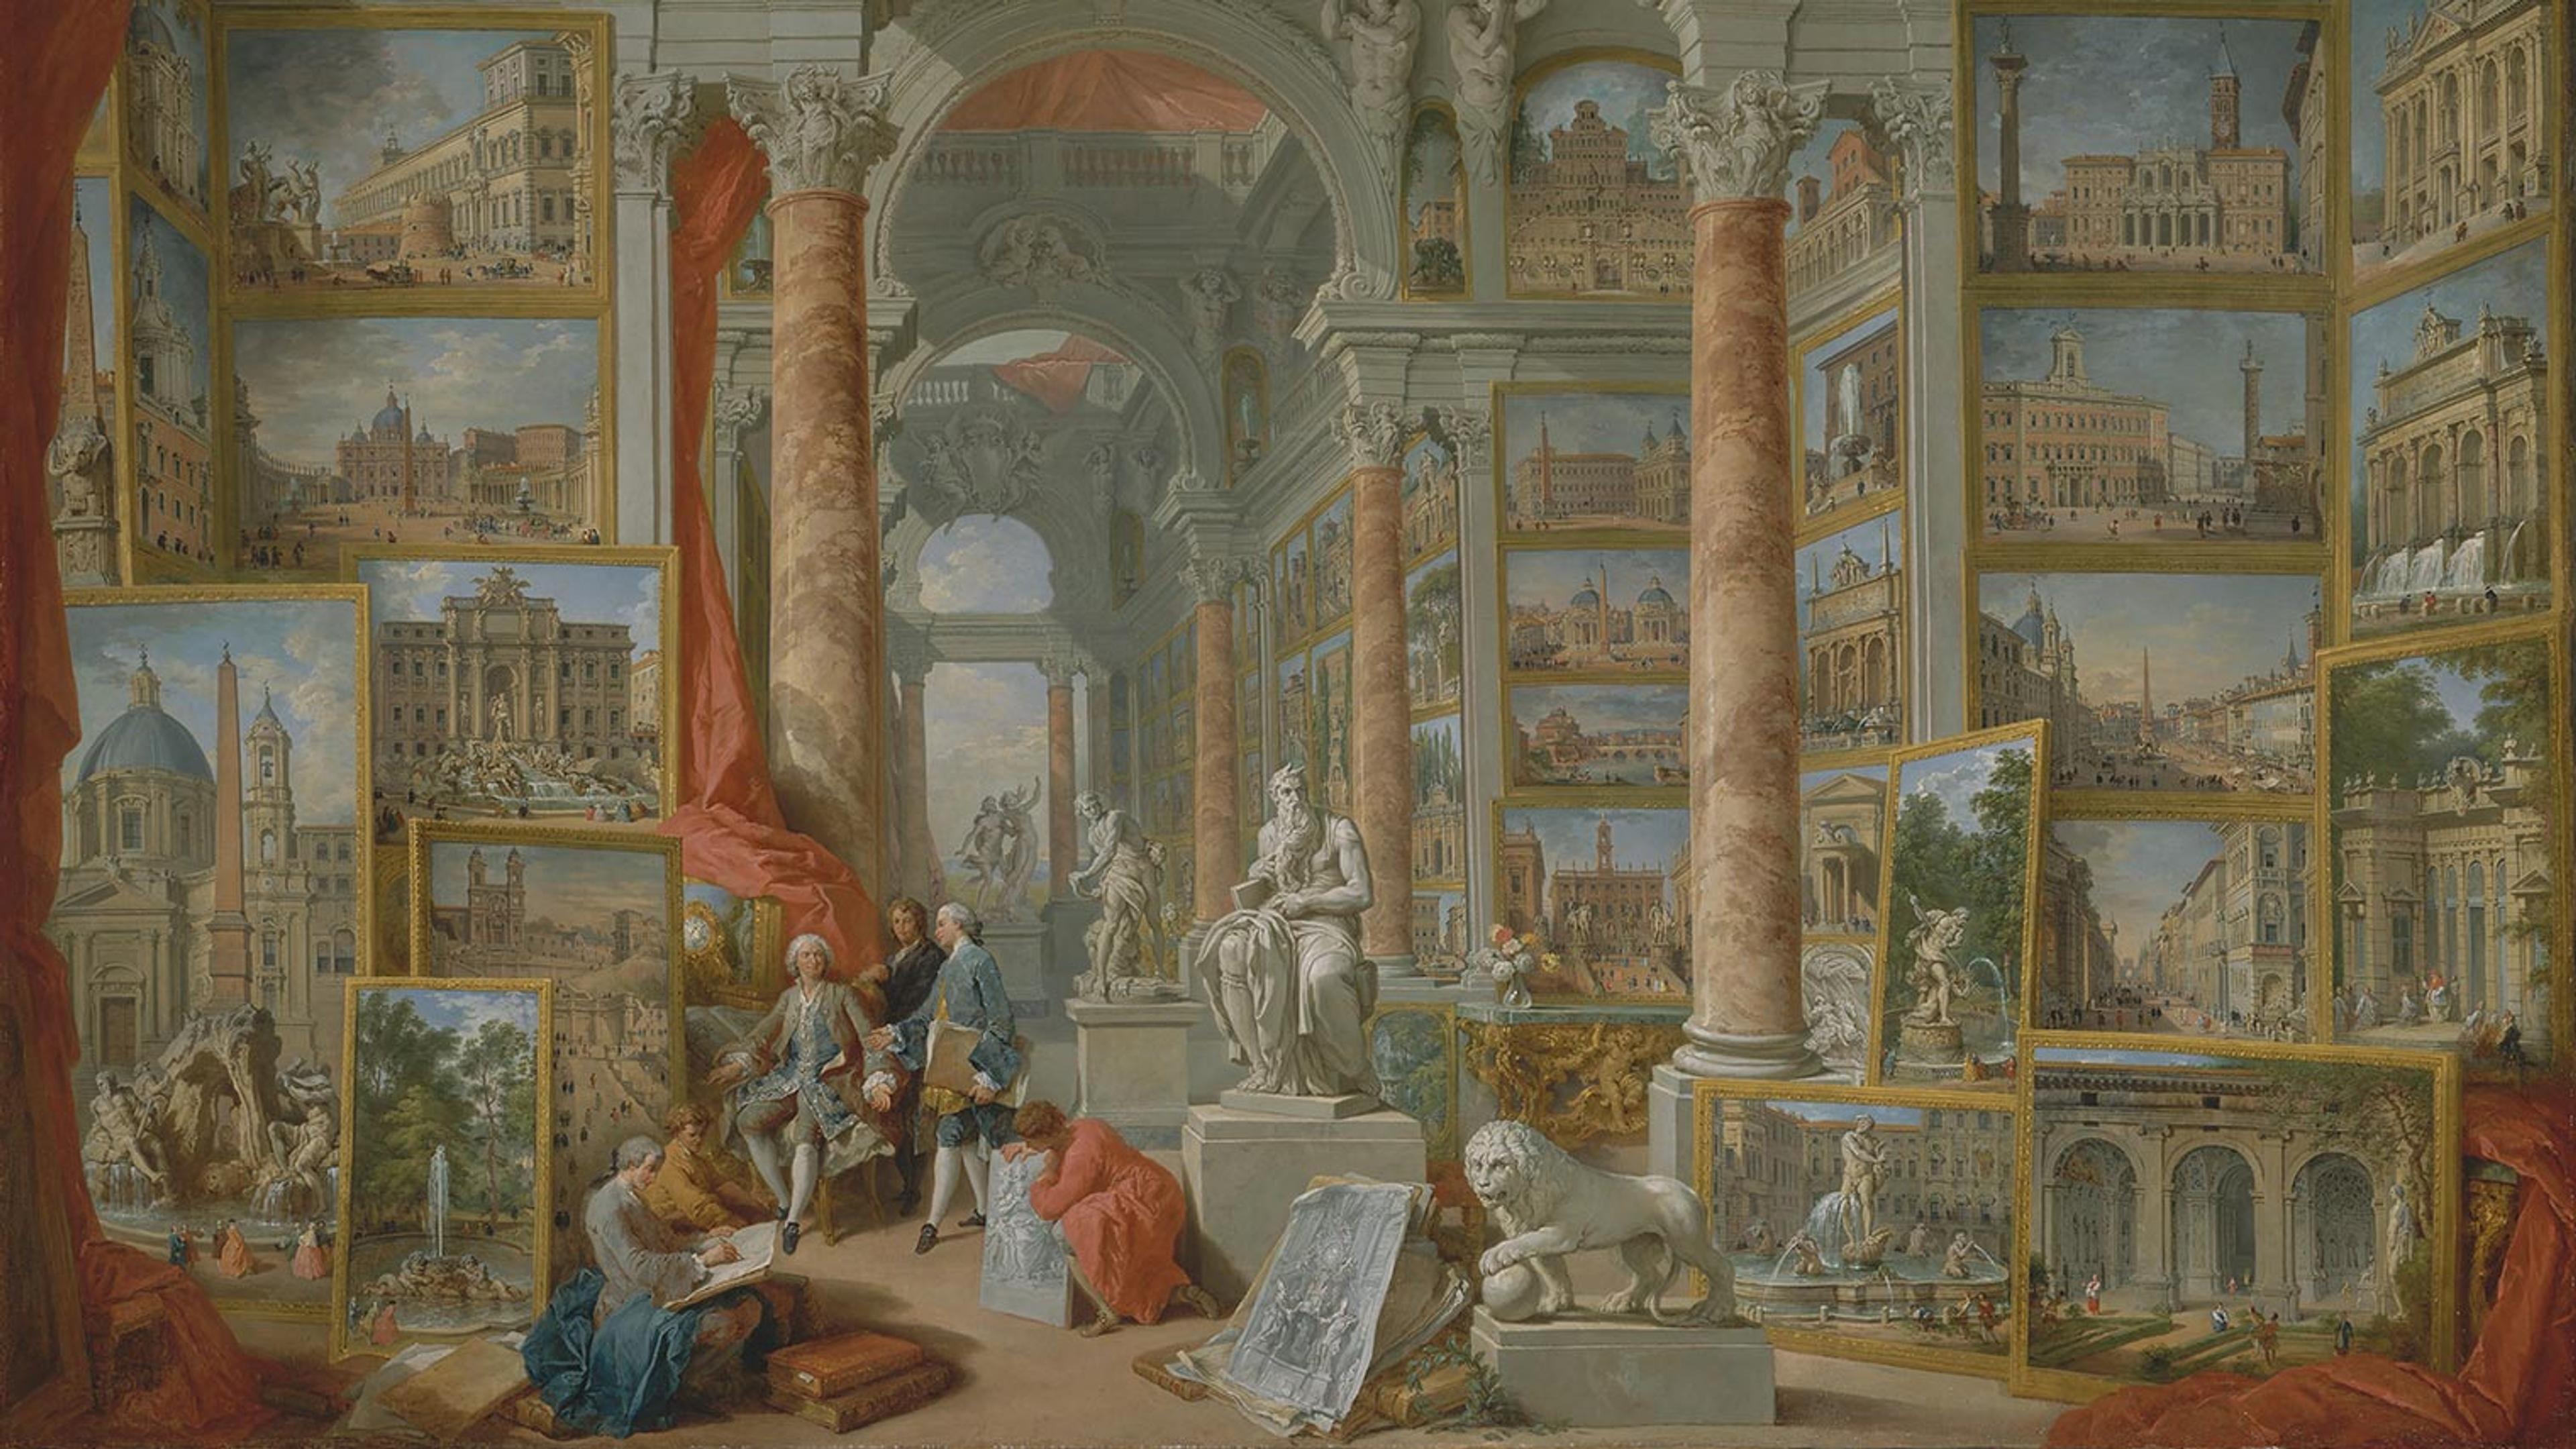 A painting of a Roman temple filled with European paintings